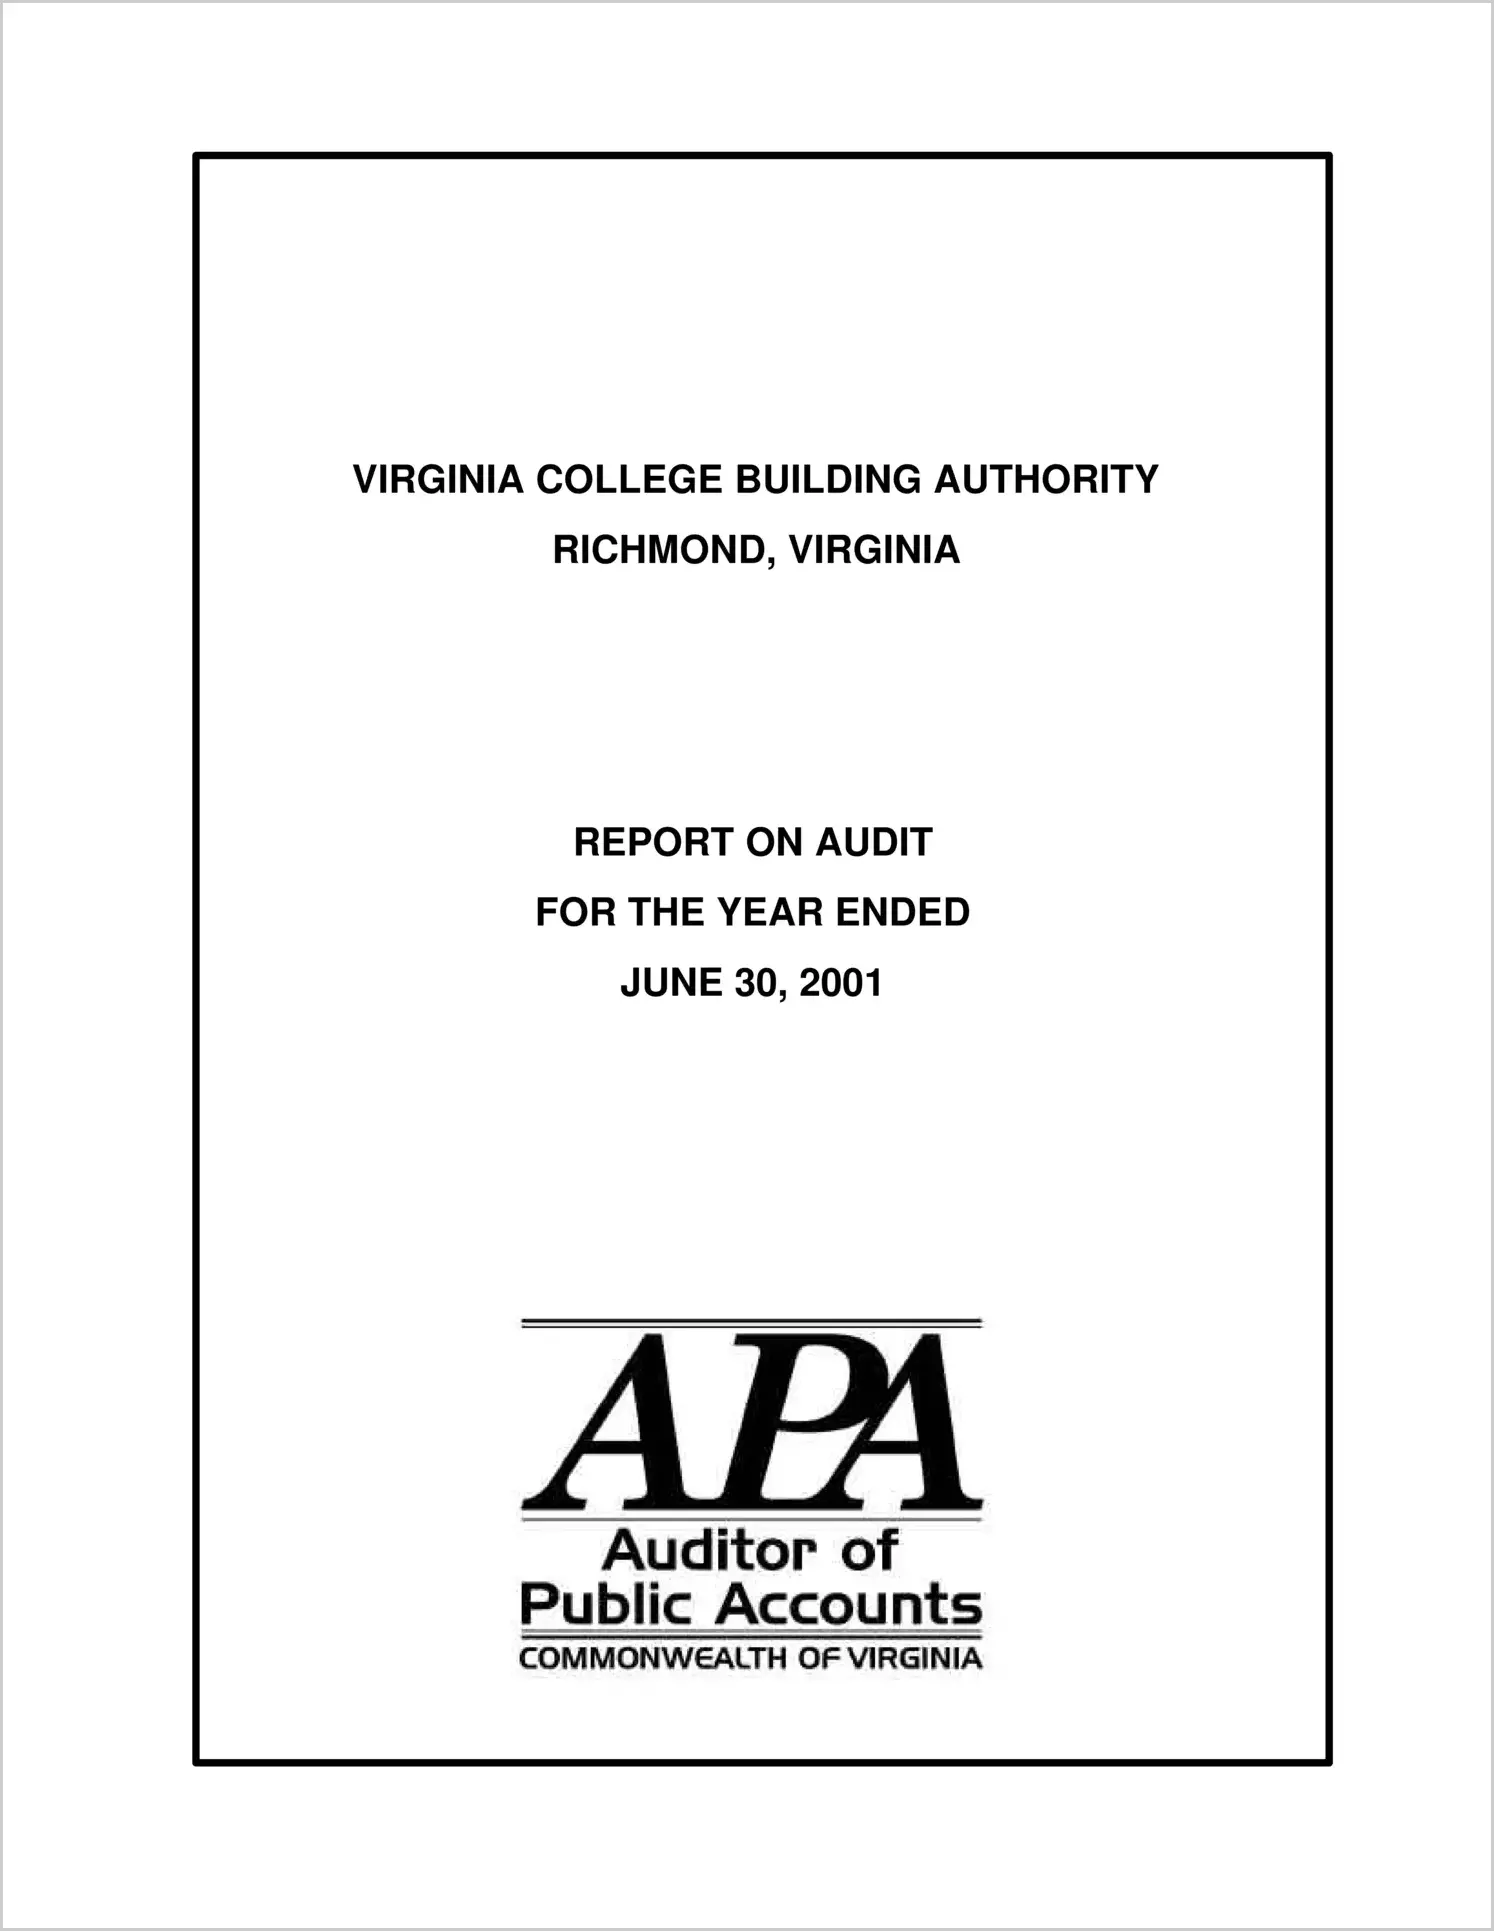 Virginia College Building Authority for the year ended June 30, 2001